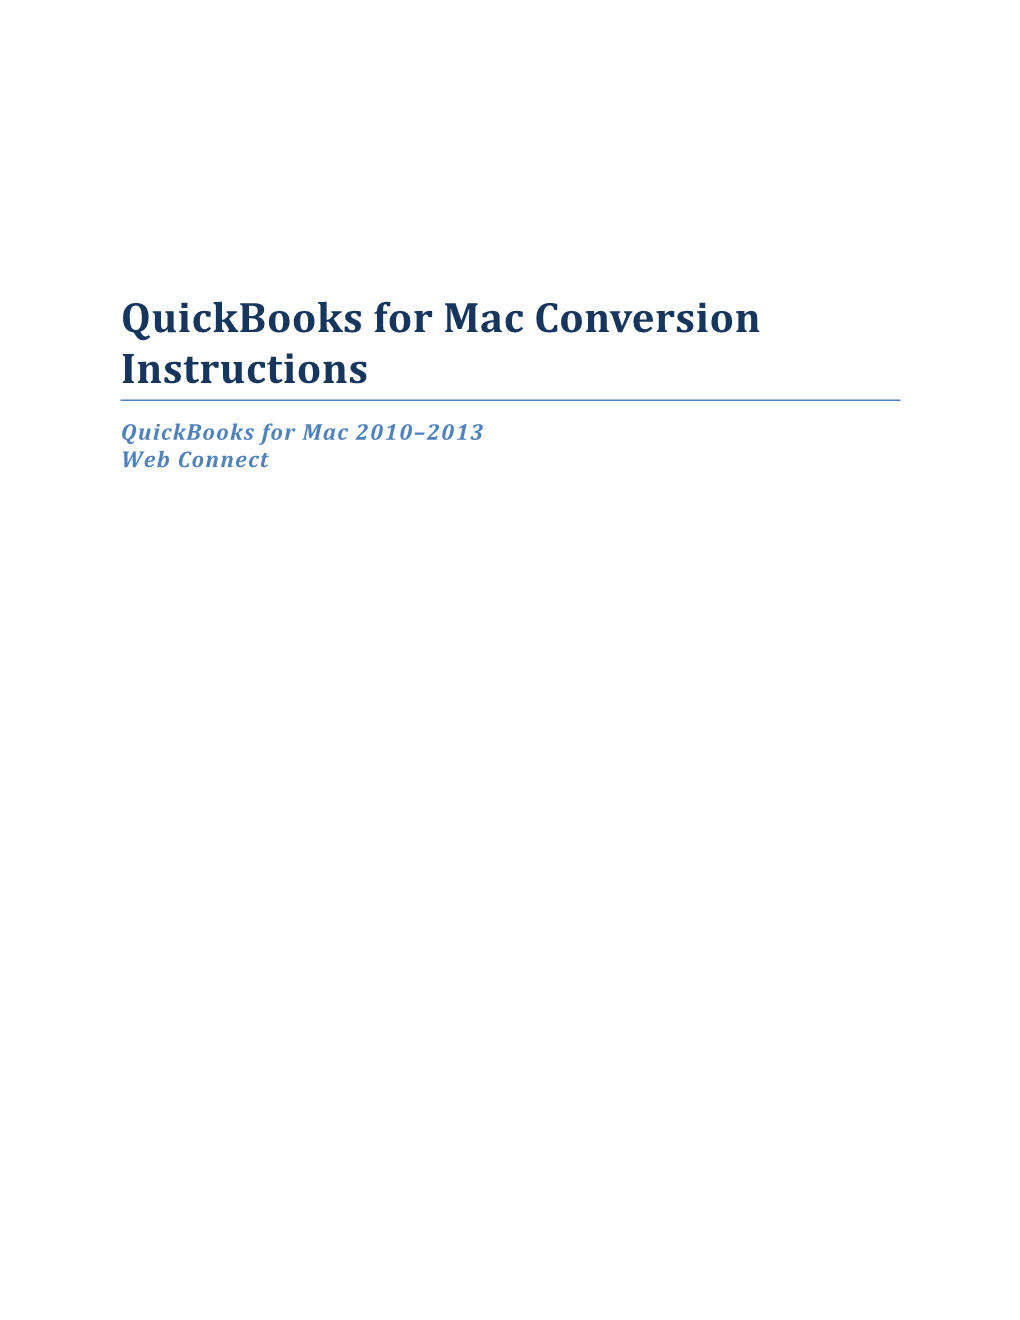 Quickbooks for Mac Conversion Instructions